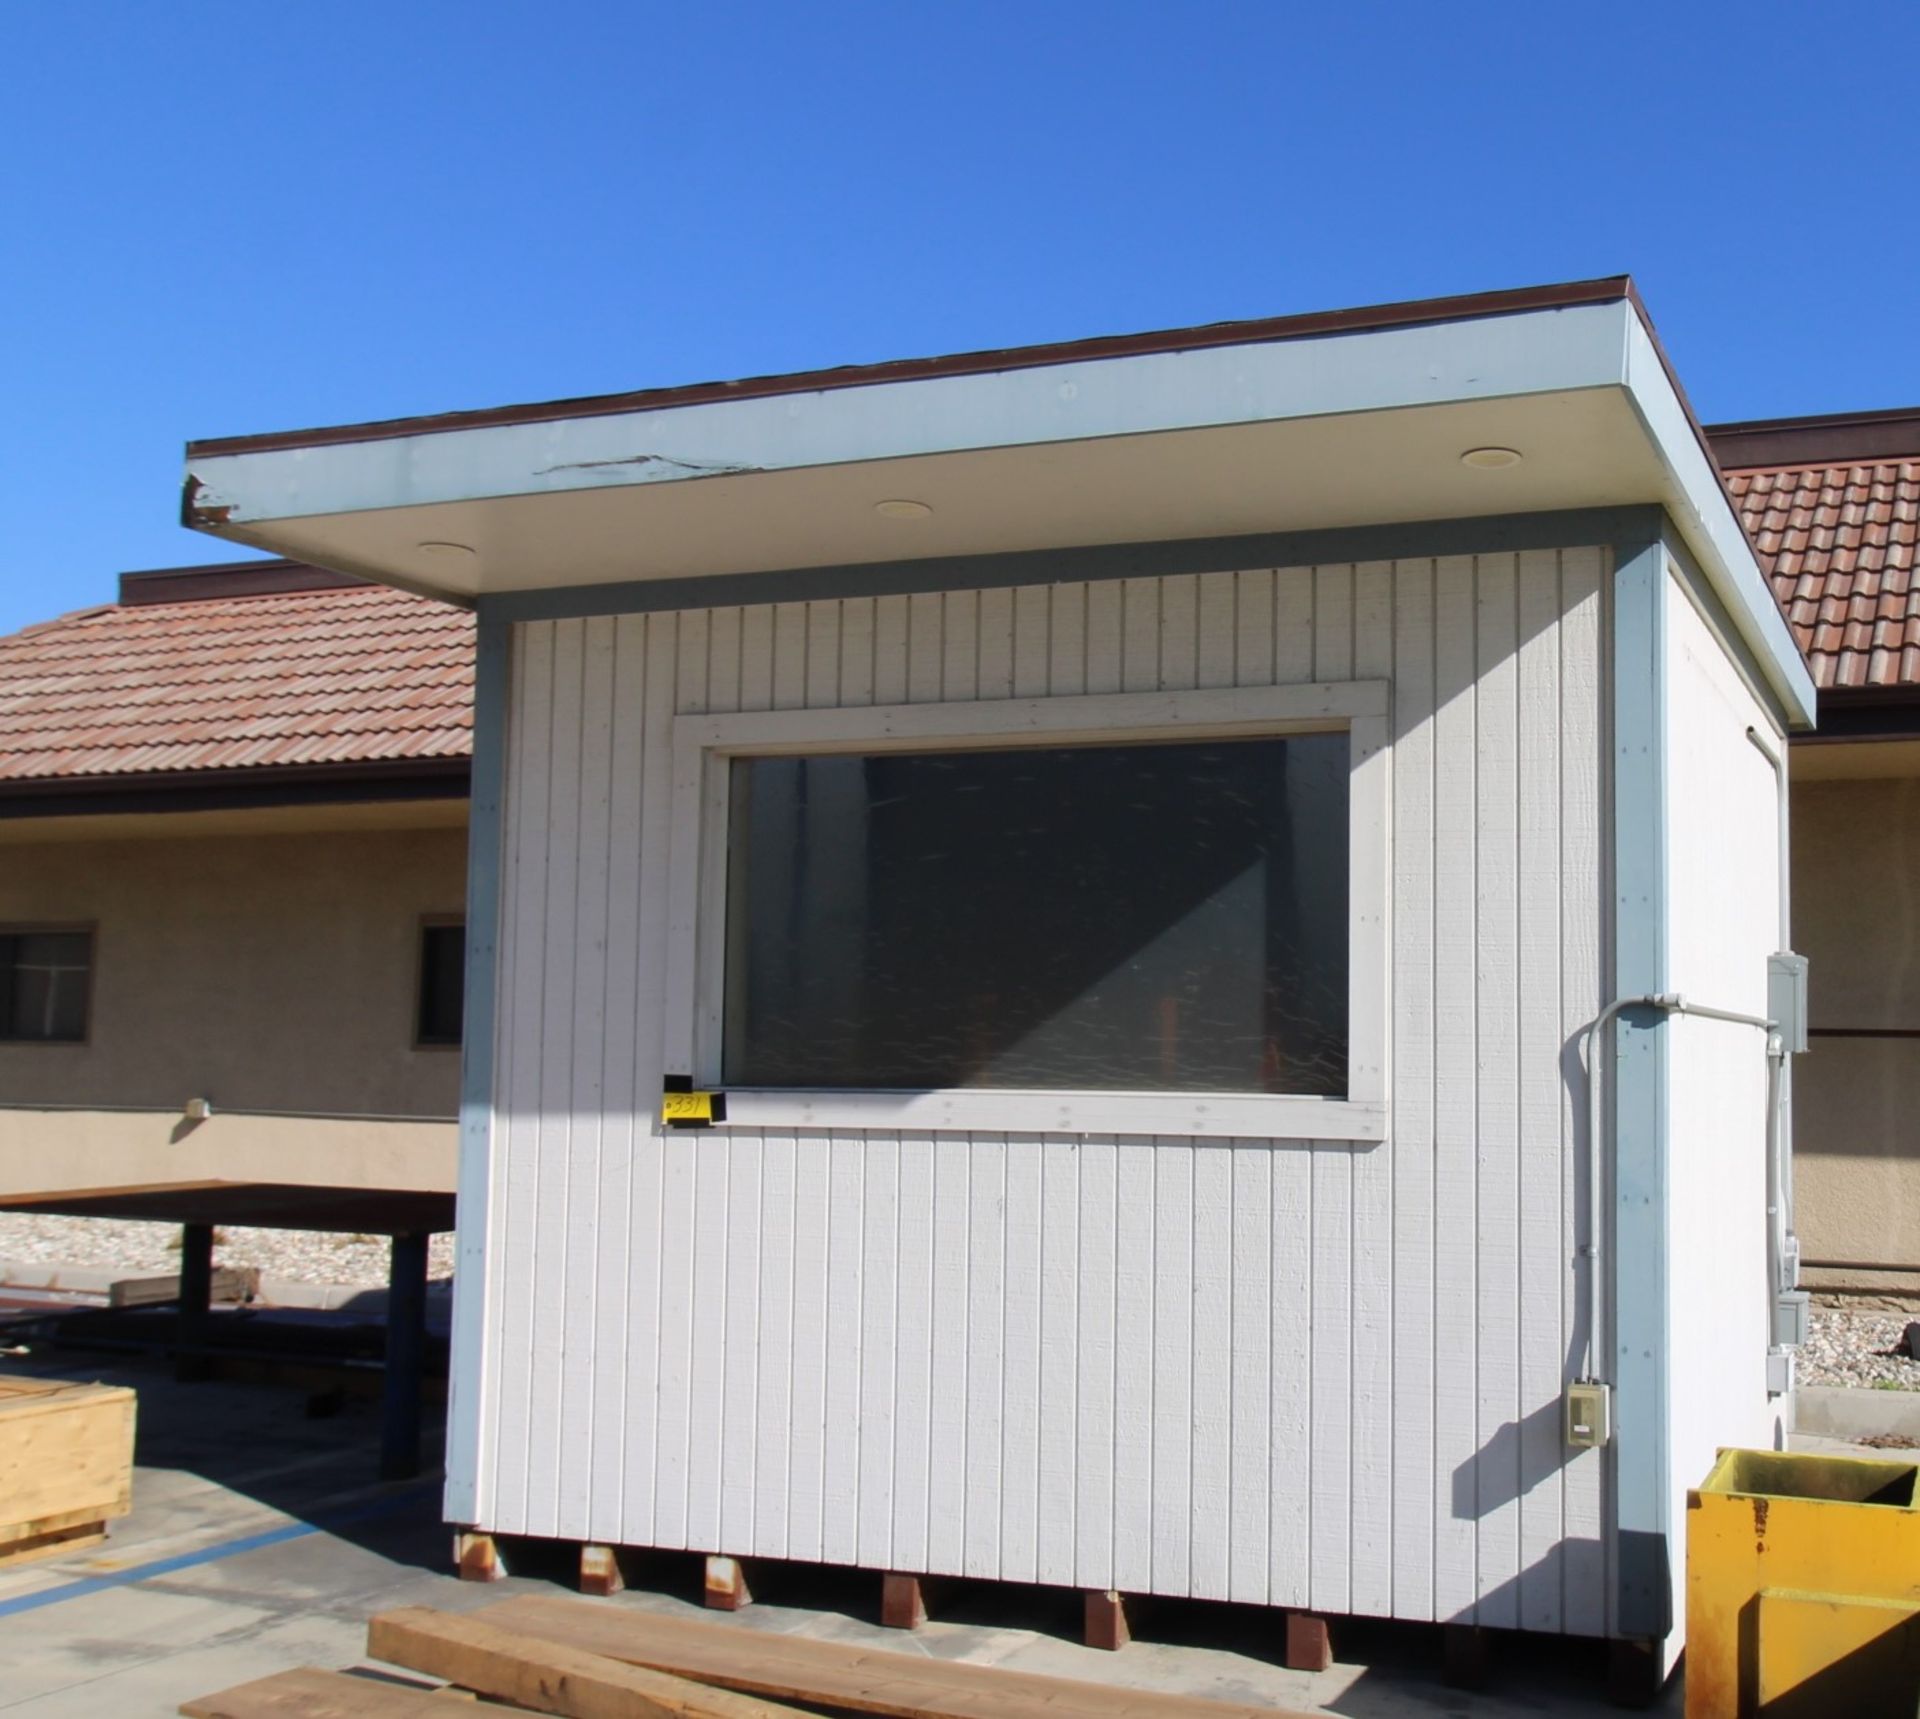 PORTABLE OUTDOOR BUILDING, 8' X 6' INTERIOR DIMS., insulated panel walls, multiple windows, entry